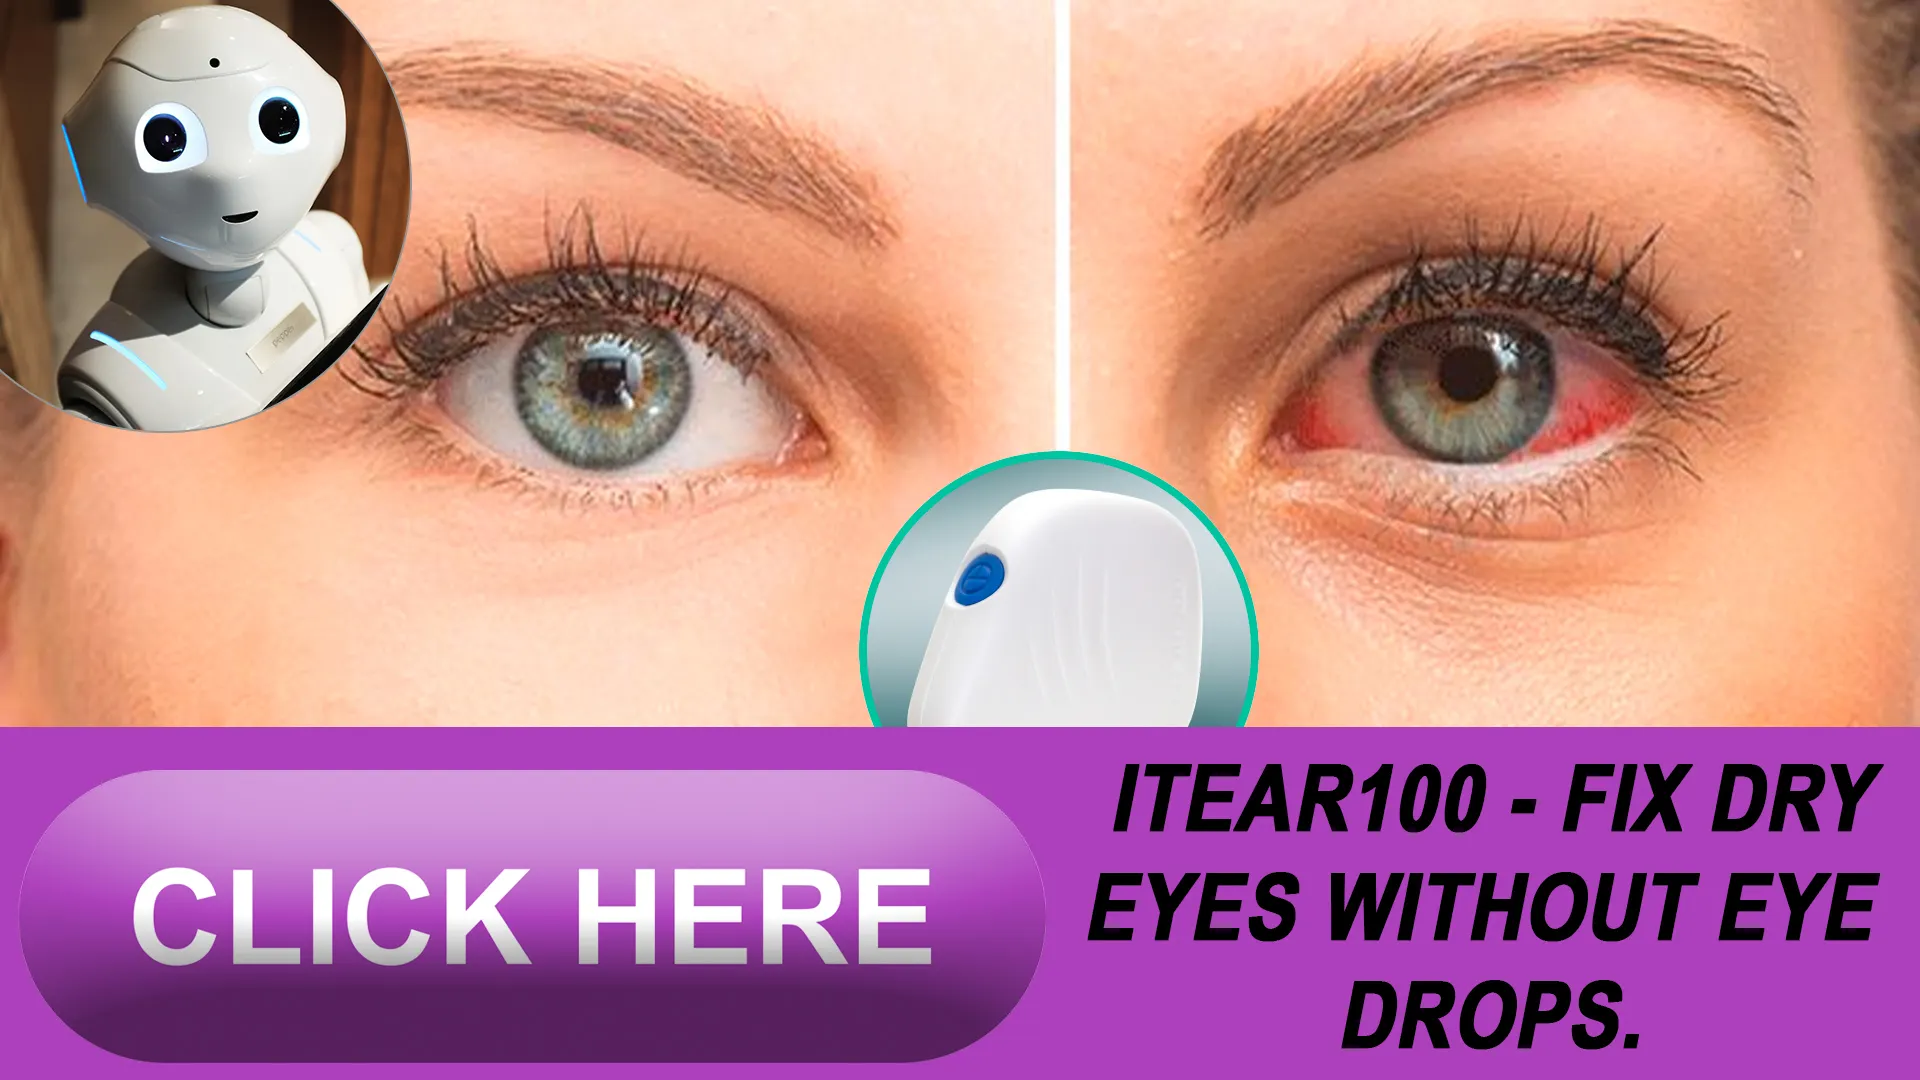 Introducing iTEAR100 for Children